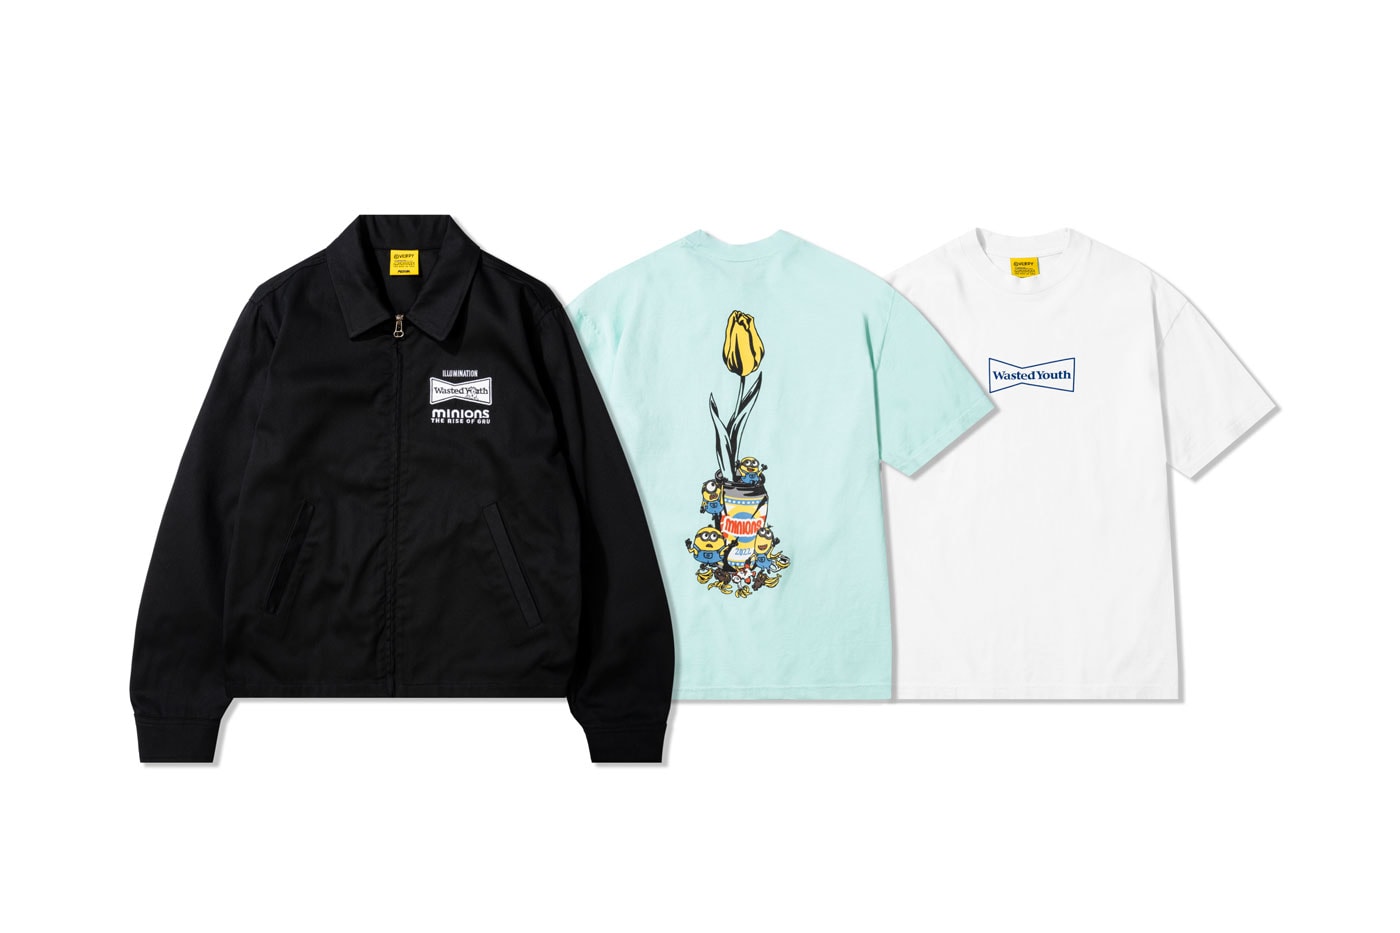 Verdy Minions yellow launch secomnd capsule collection skateboards hoodies shirts hats caps girls don't cry wasted youth tulip release info date price